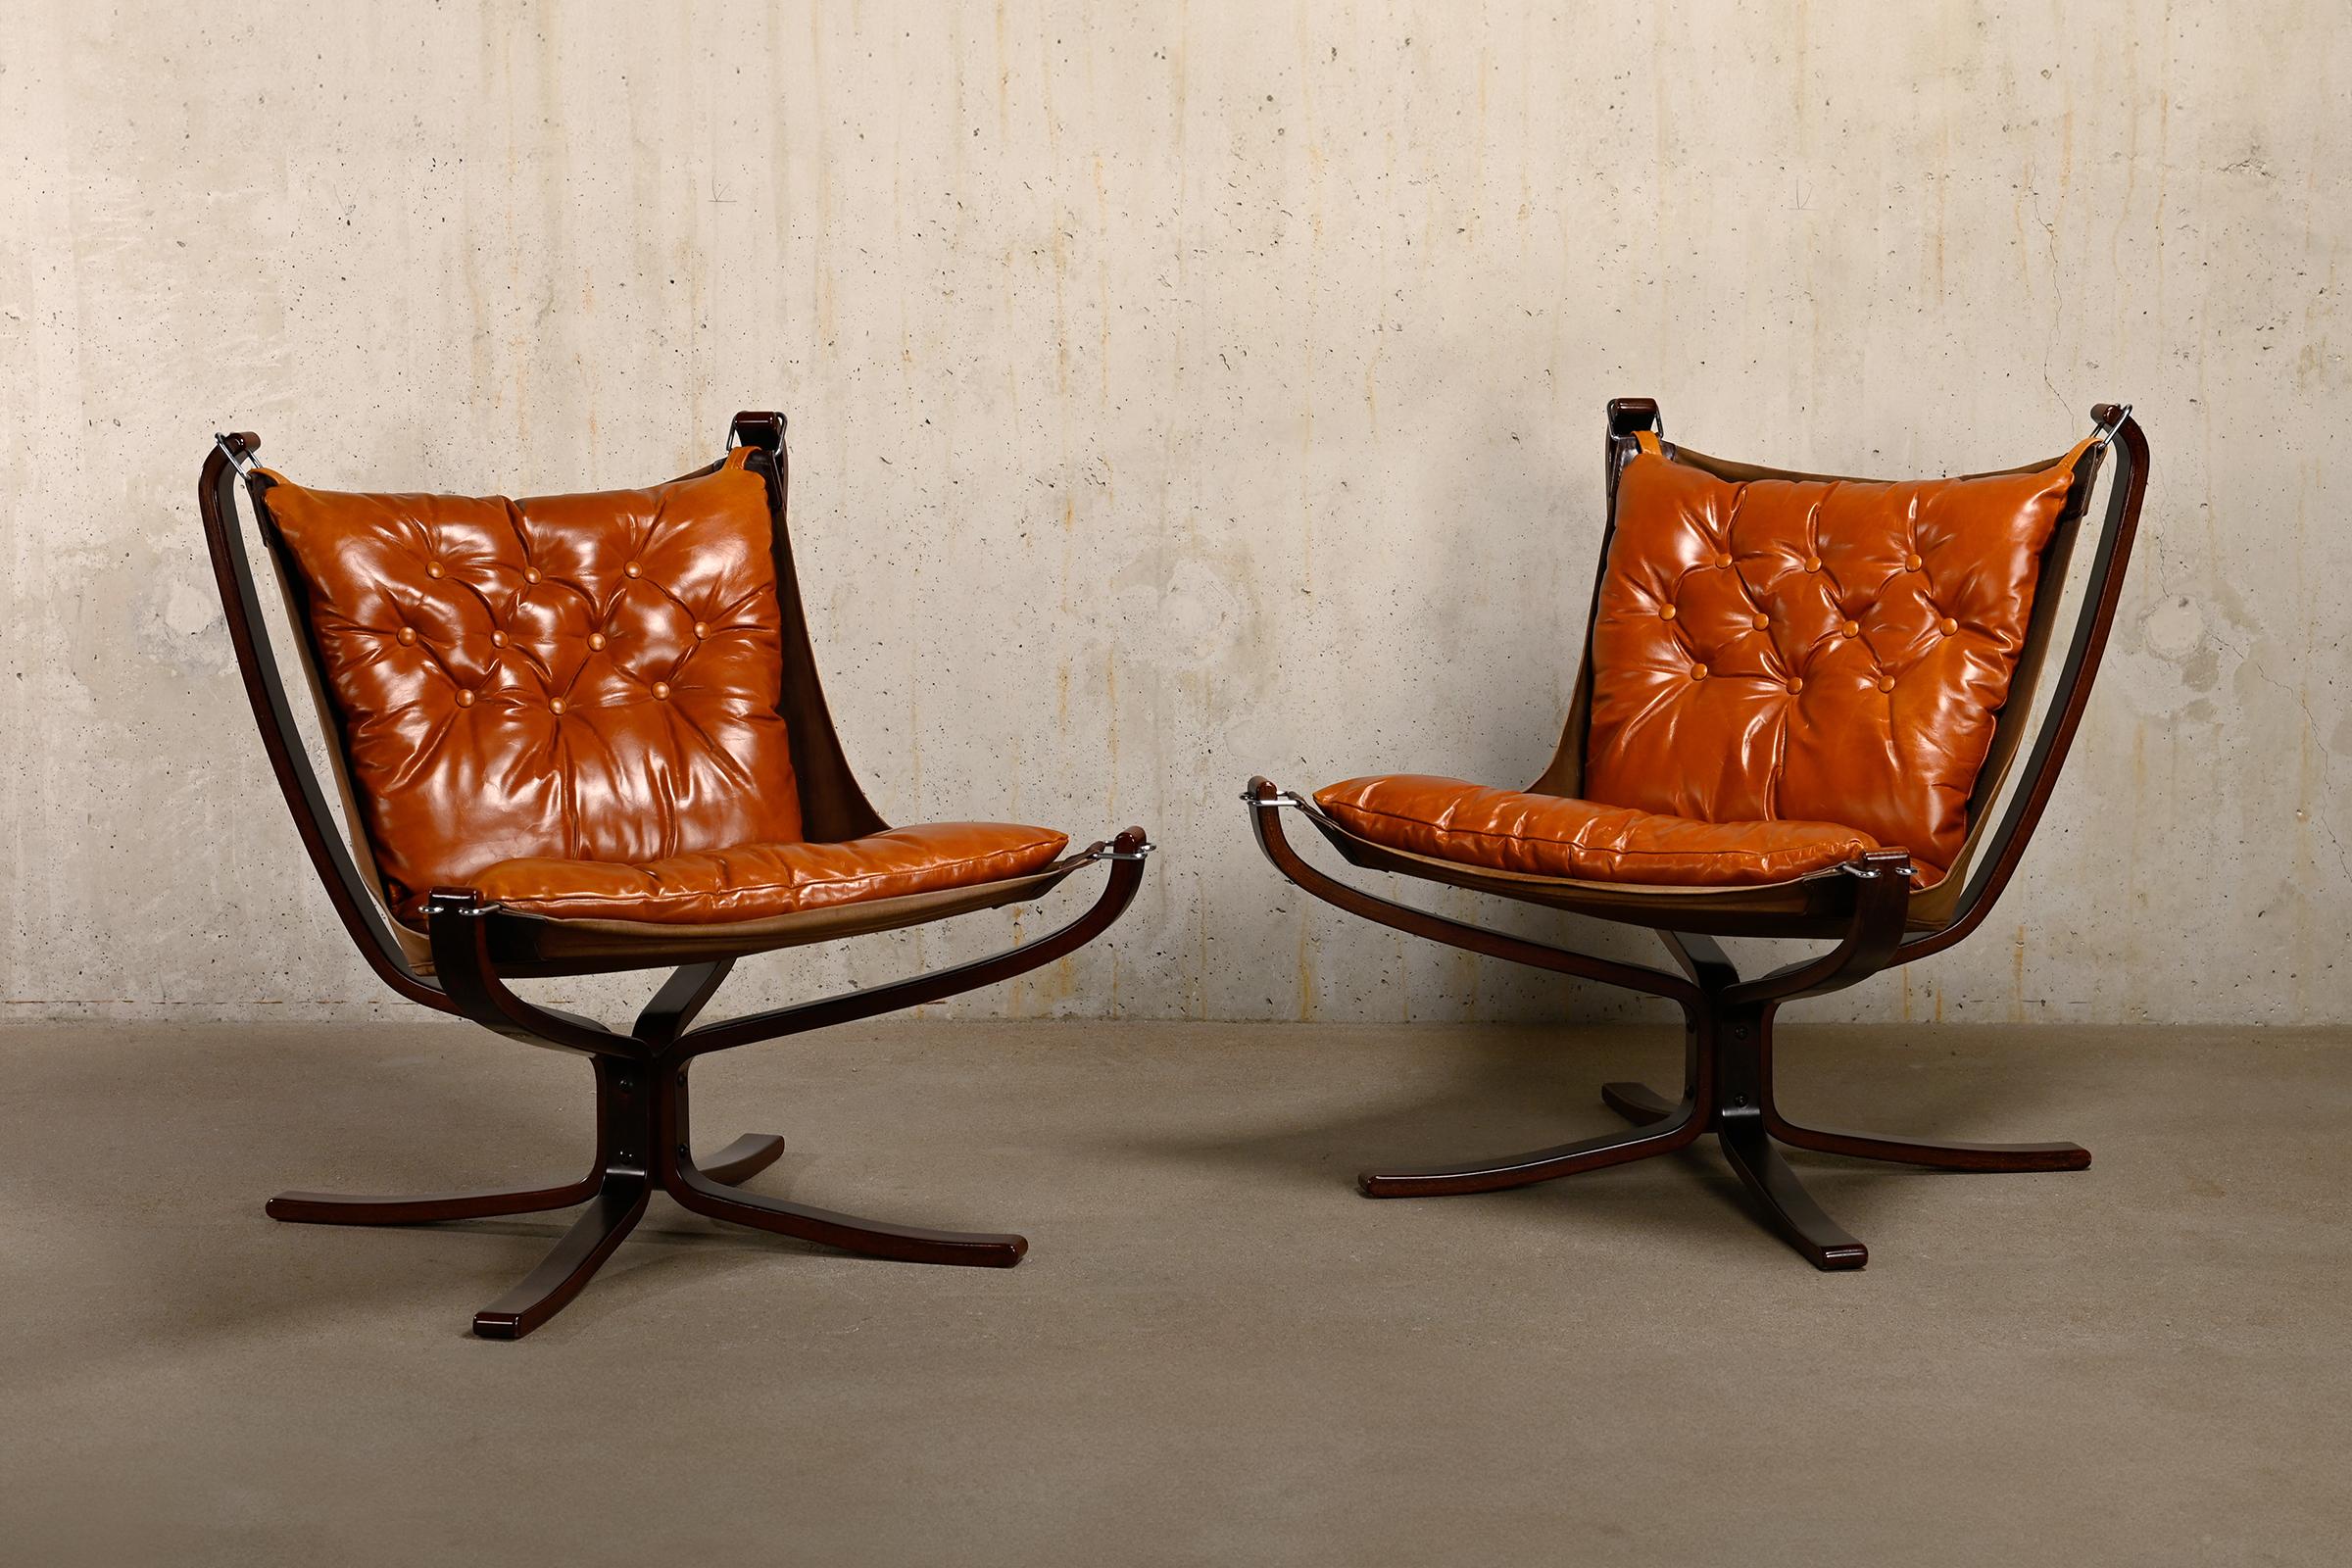 Very nice pair of 'Falcon' Lounge Chairs designed by Sigurd Ressell for Vatne Møbler, Norway 1970's. Curved dark brown stained wooden frame connected by a metal plate. Hanging in it is a canvas seat with cognac-colored leather cushions. Very good